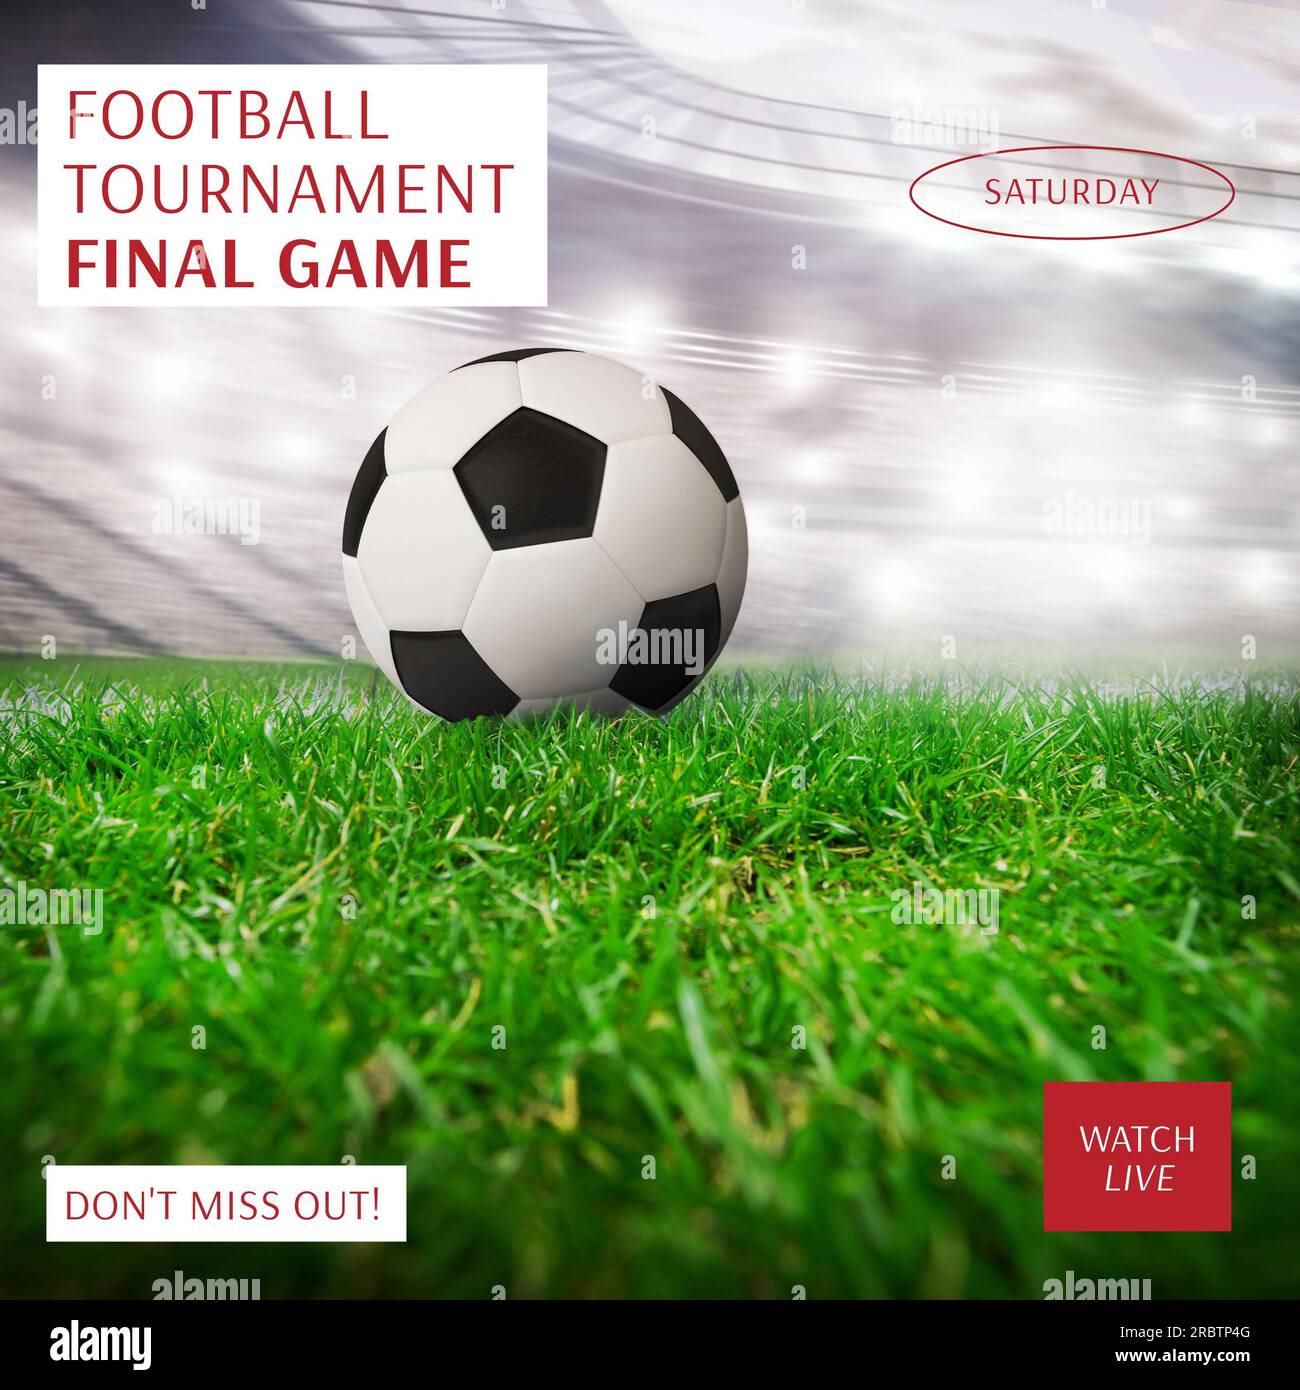 Football tournament final game text over football on stadium pitch Stock Photo